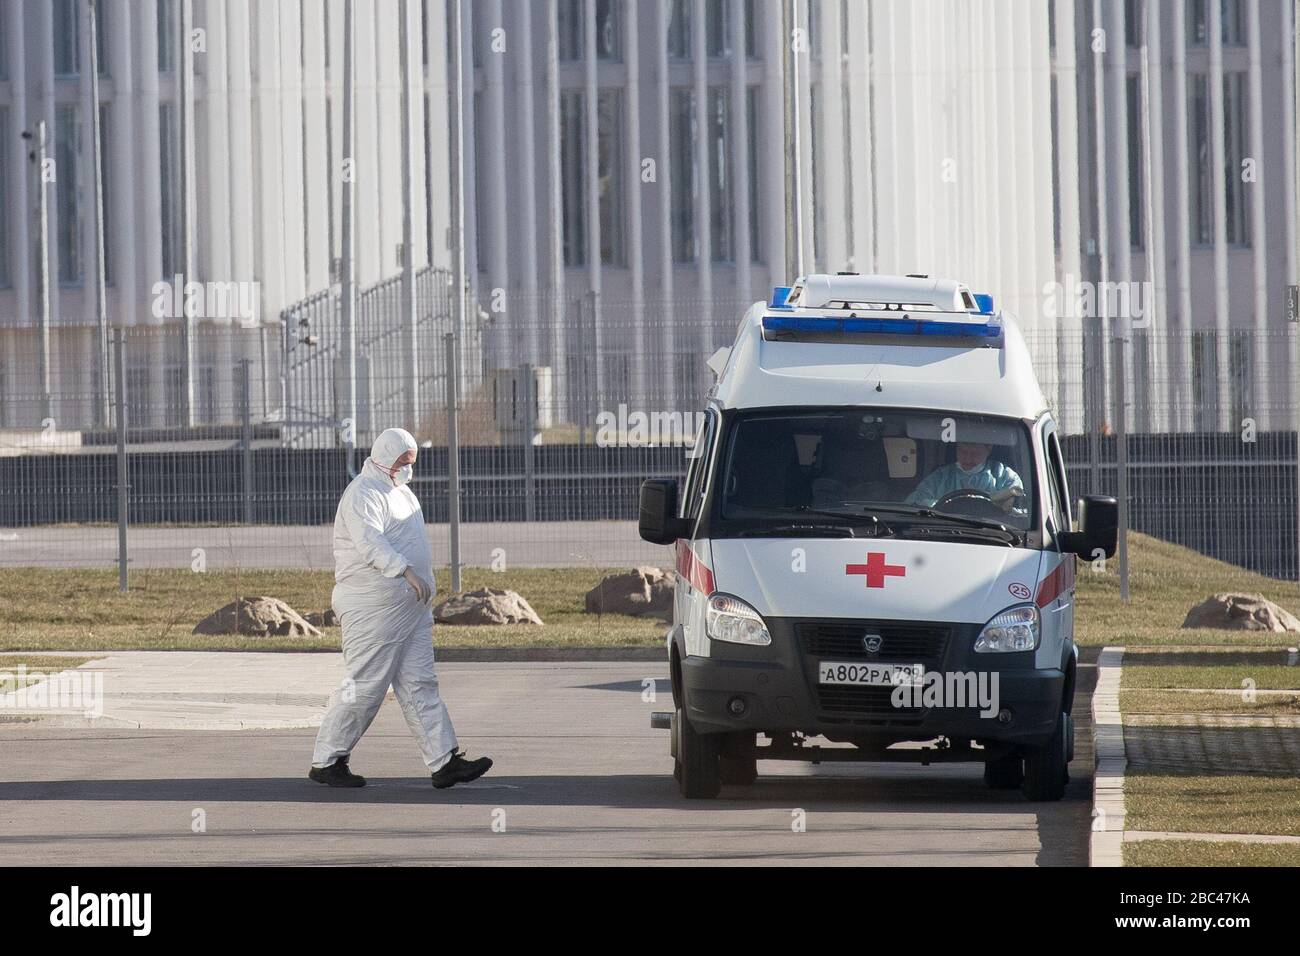 Moscow, Russia. 25th Mar, 2020. A medical specialist wearing protective gear walks near an ambulance outside a hospital  in Kommunarka, Novomoskovskiy Administrative District, region of the New Moscow during the pandemic of the novel coronavirus (COVID-19). The hospital offers treatment to confirmed and potential patients with the COVID-19 infection and acute respiratory viral infection. Stock Photo